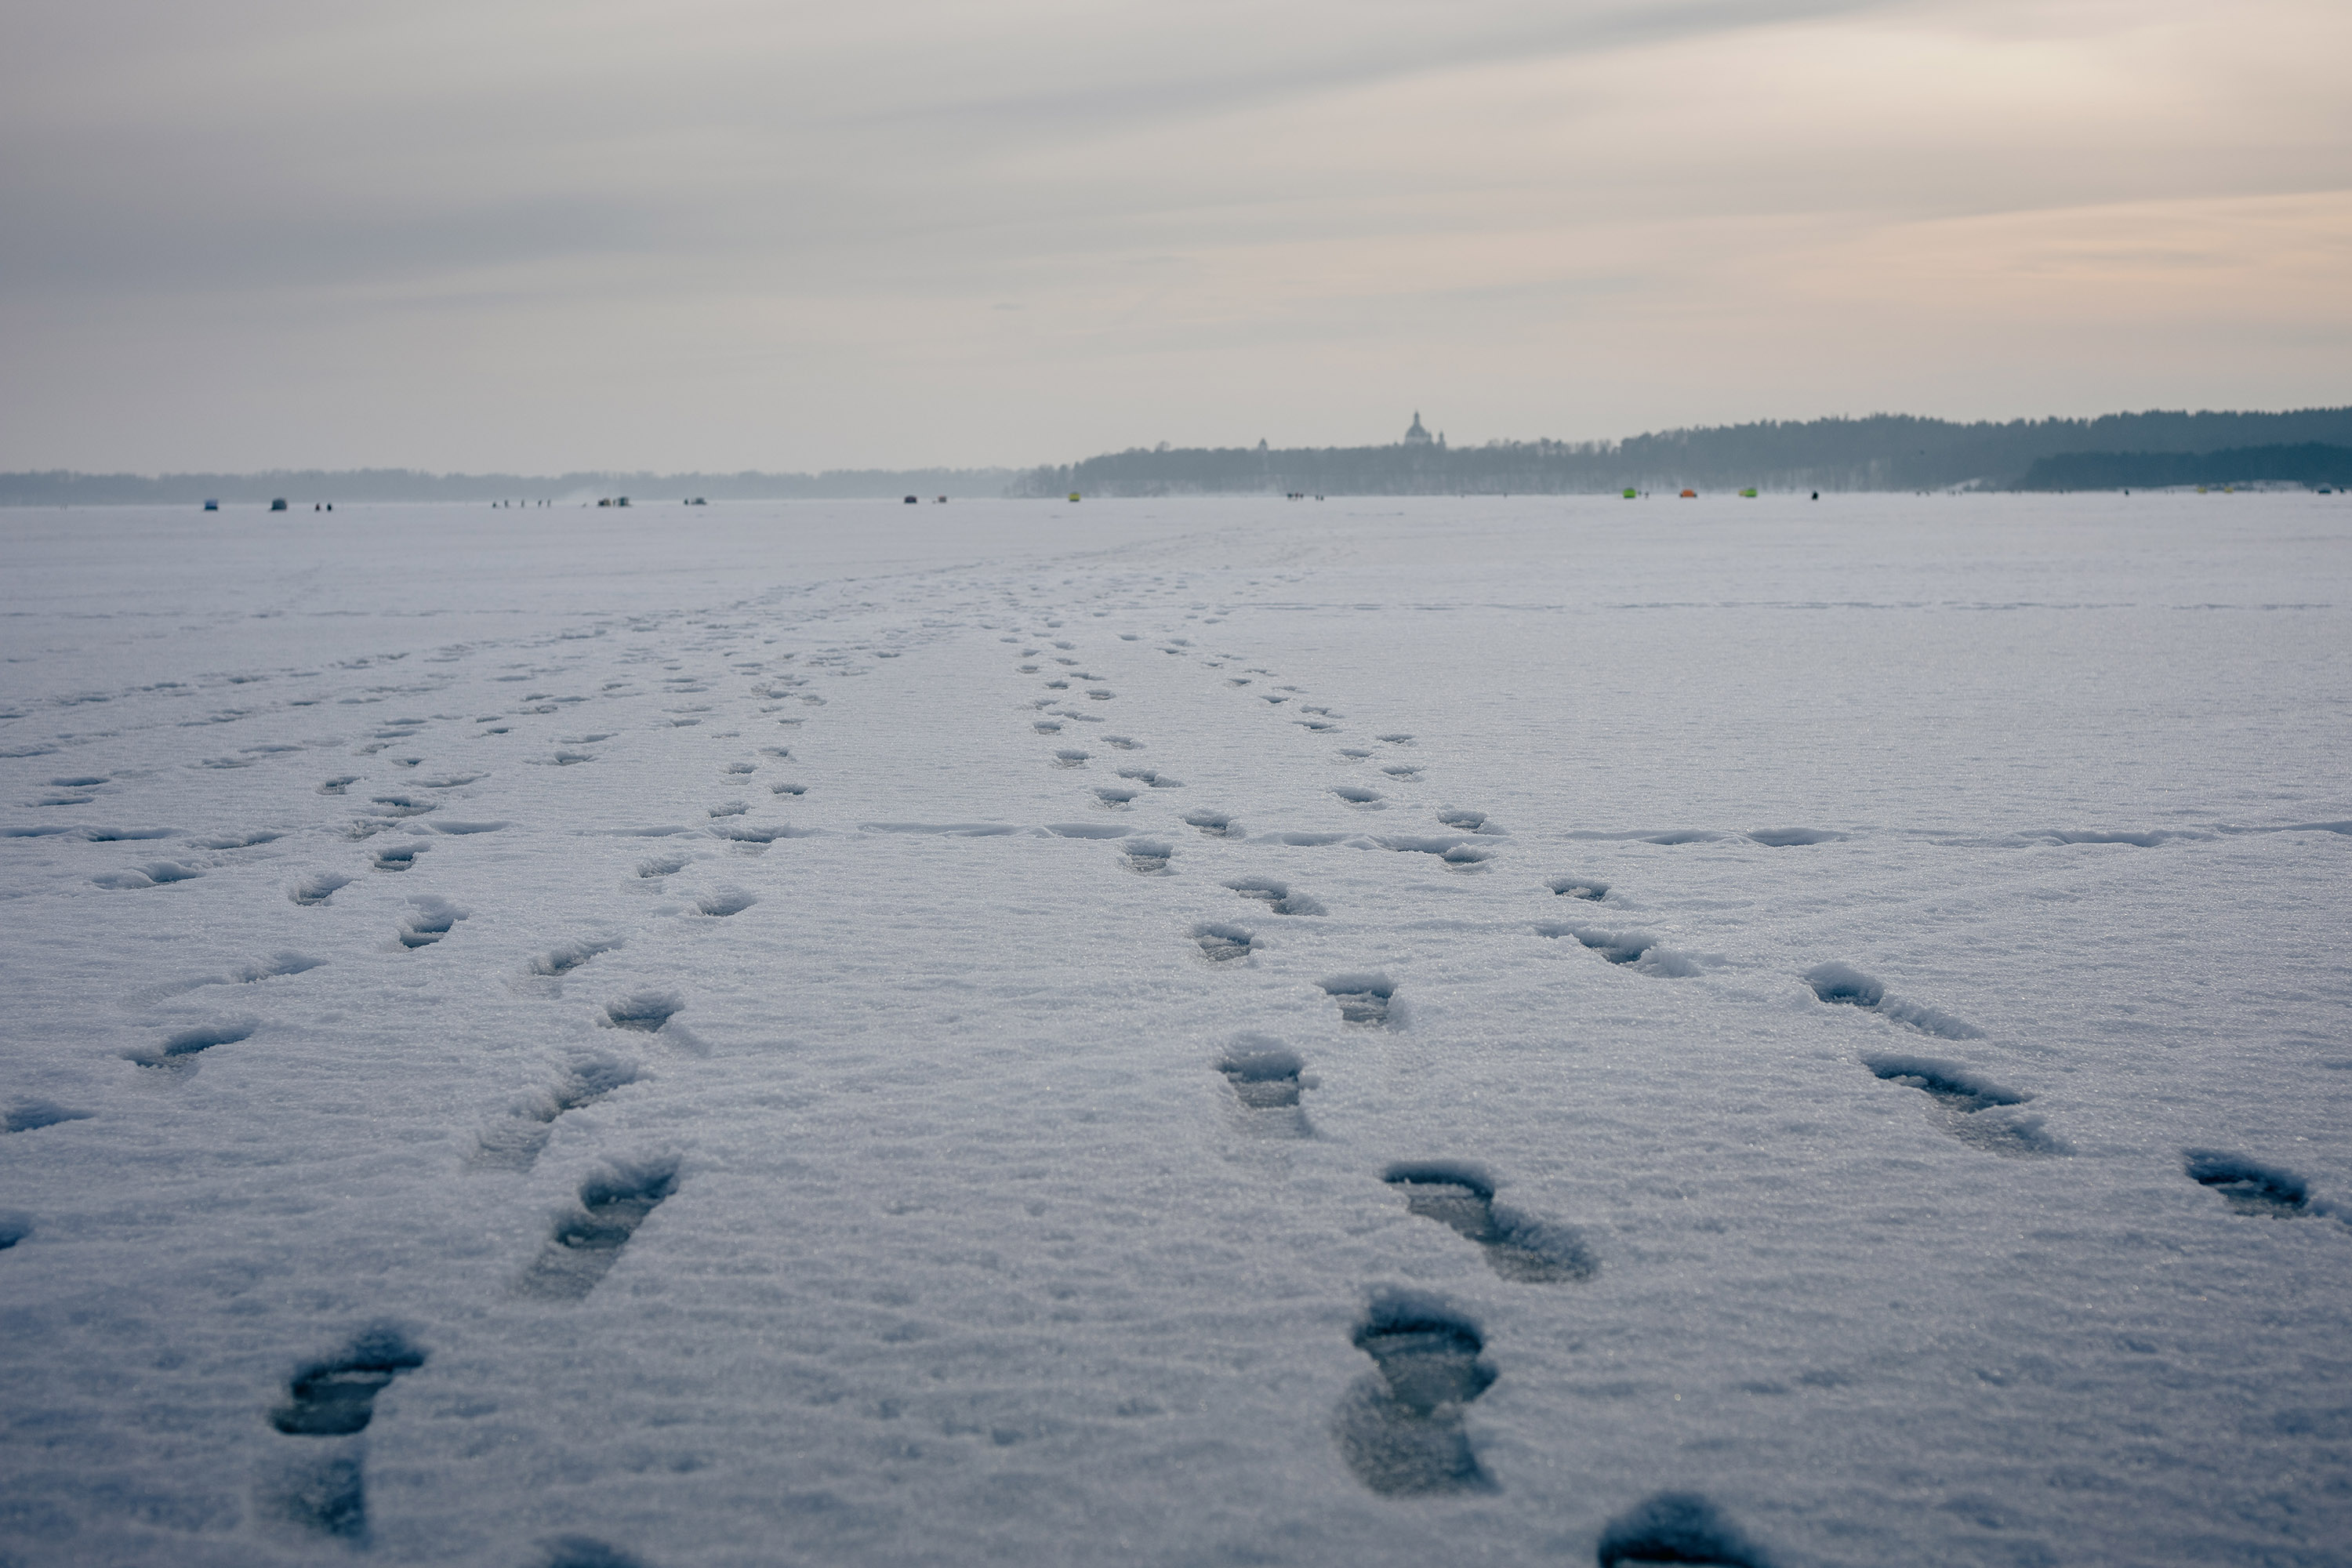 Footsteps on frozen lagoon - Contarex 50mm f2